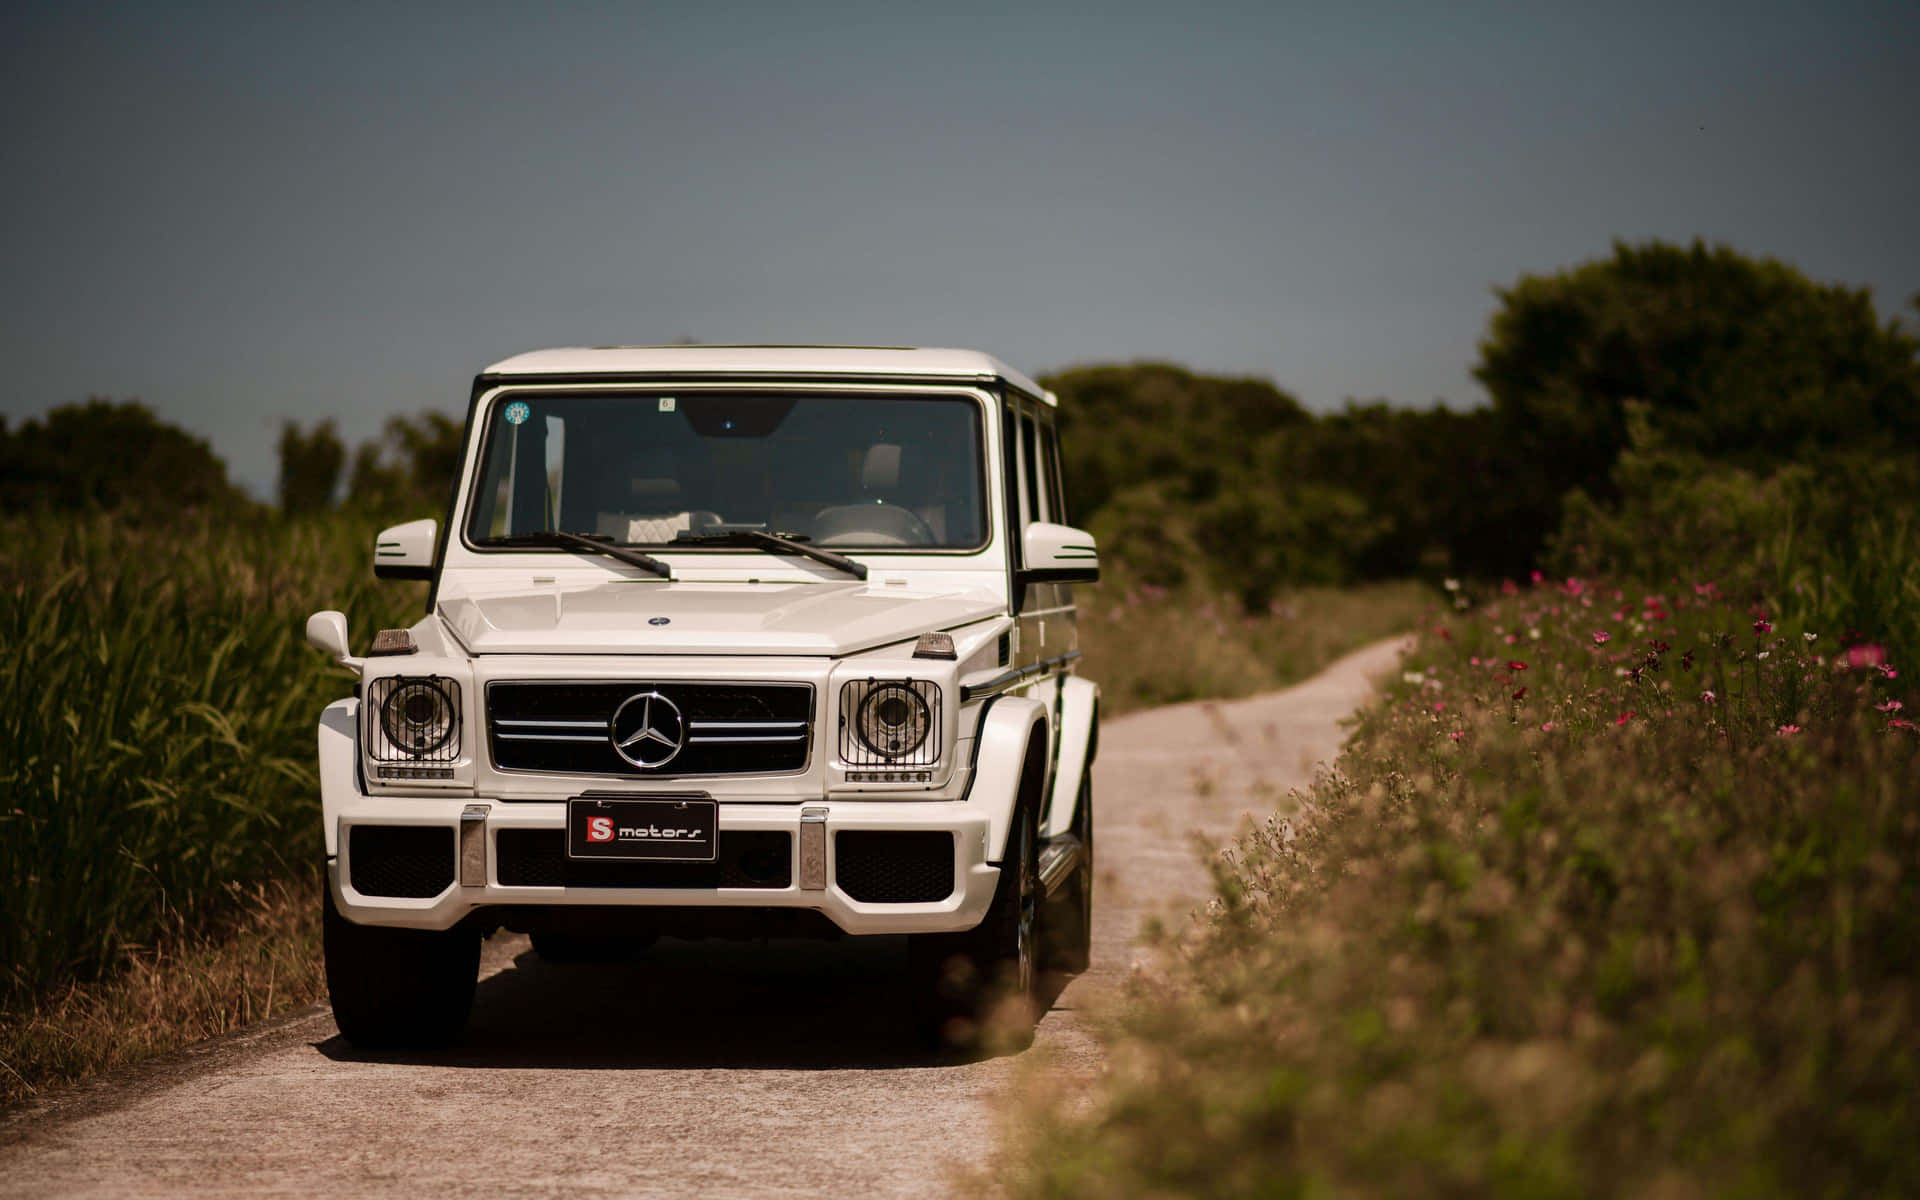 Mercedes G63 On Country Road Wallpaper